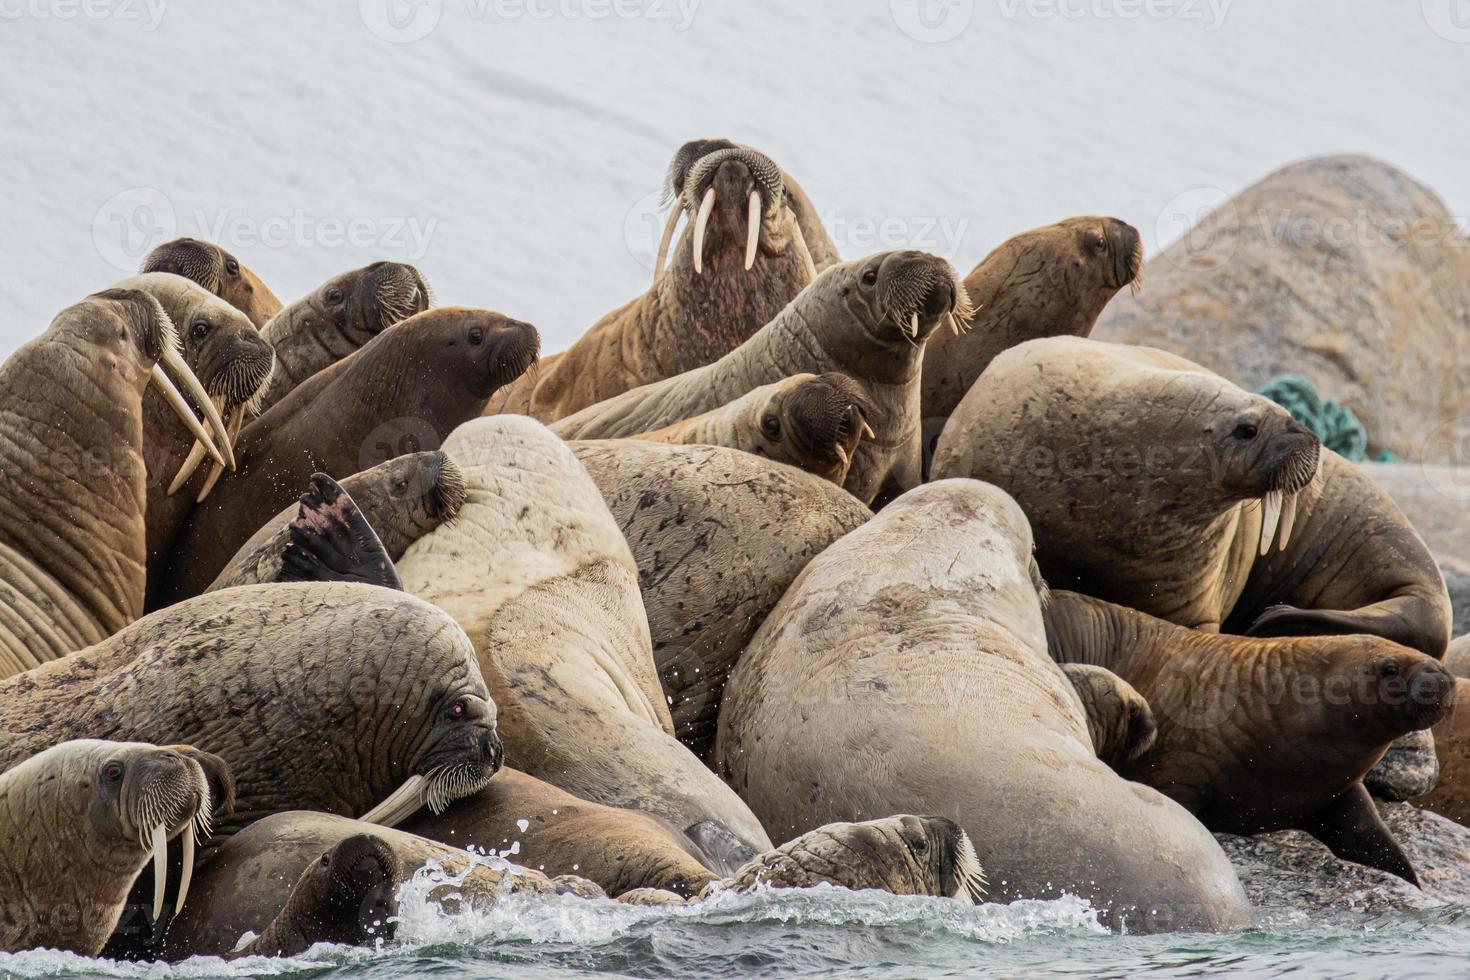 A walrus colony in Svalbard in the Arctic photo